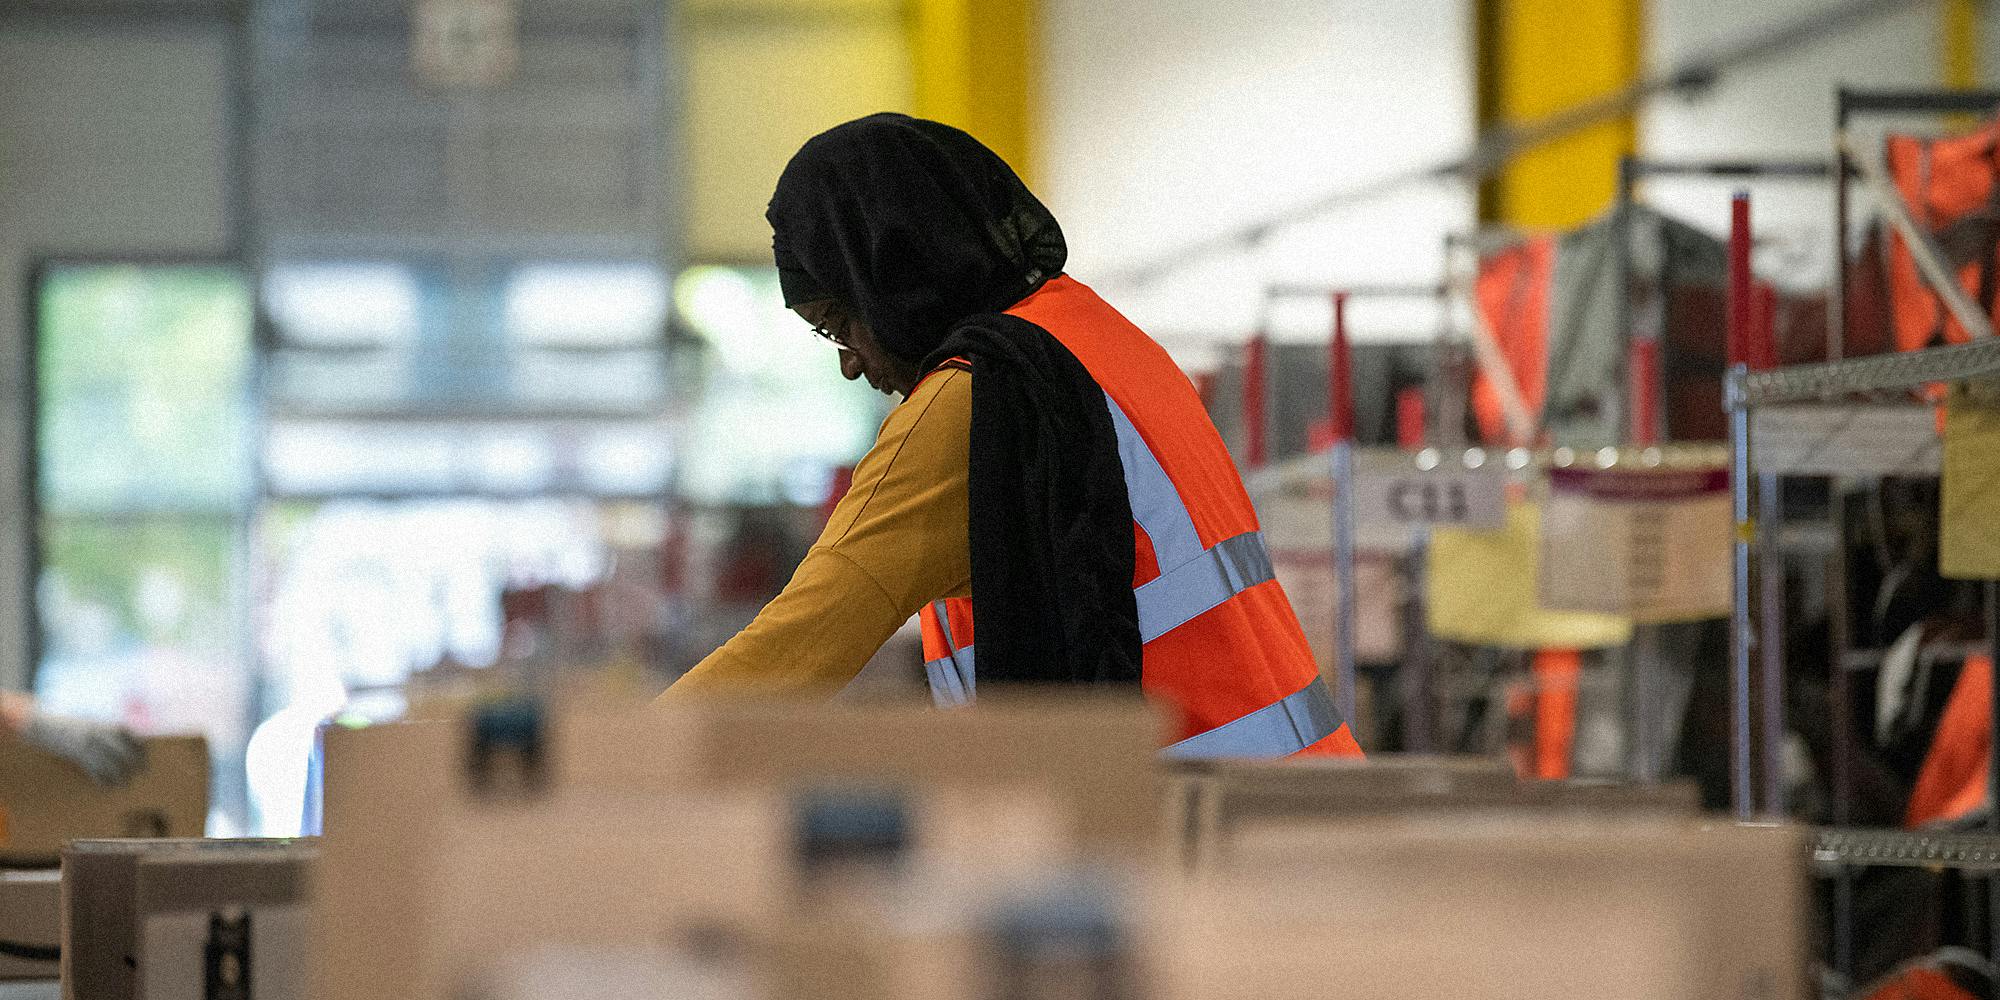 An Amazon employee inspects packages on an assembly line.